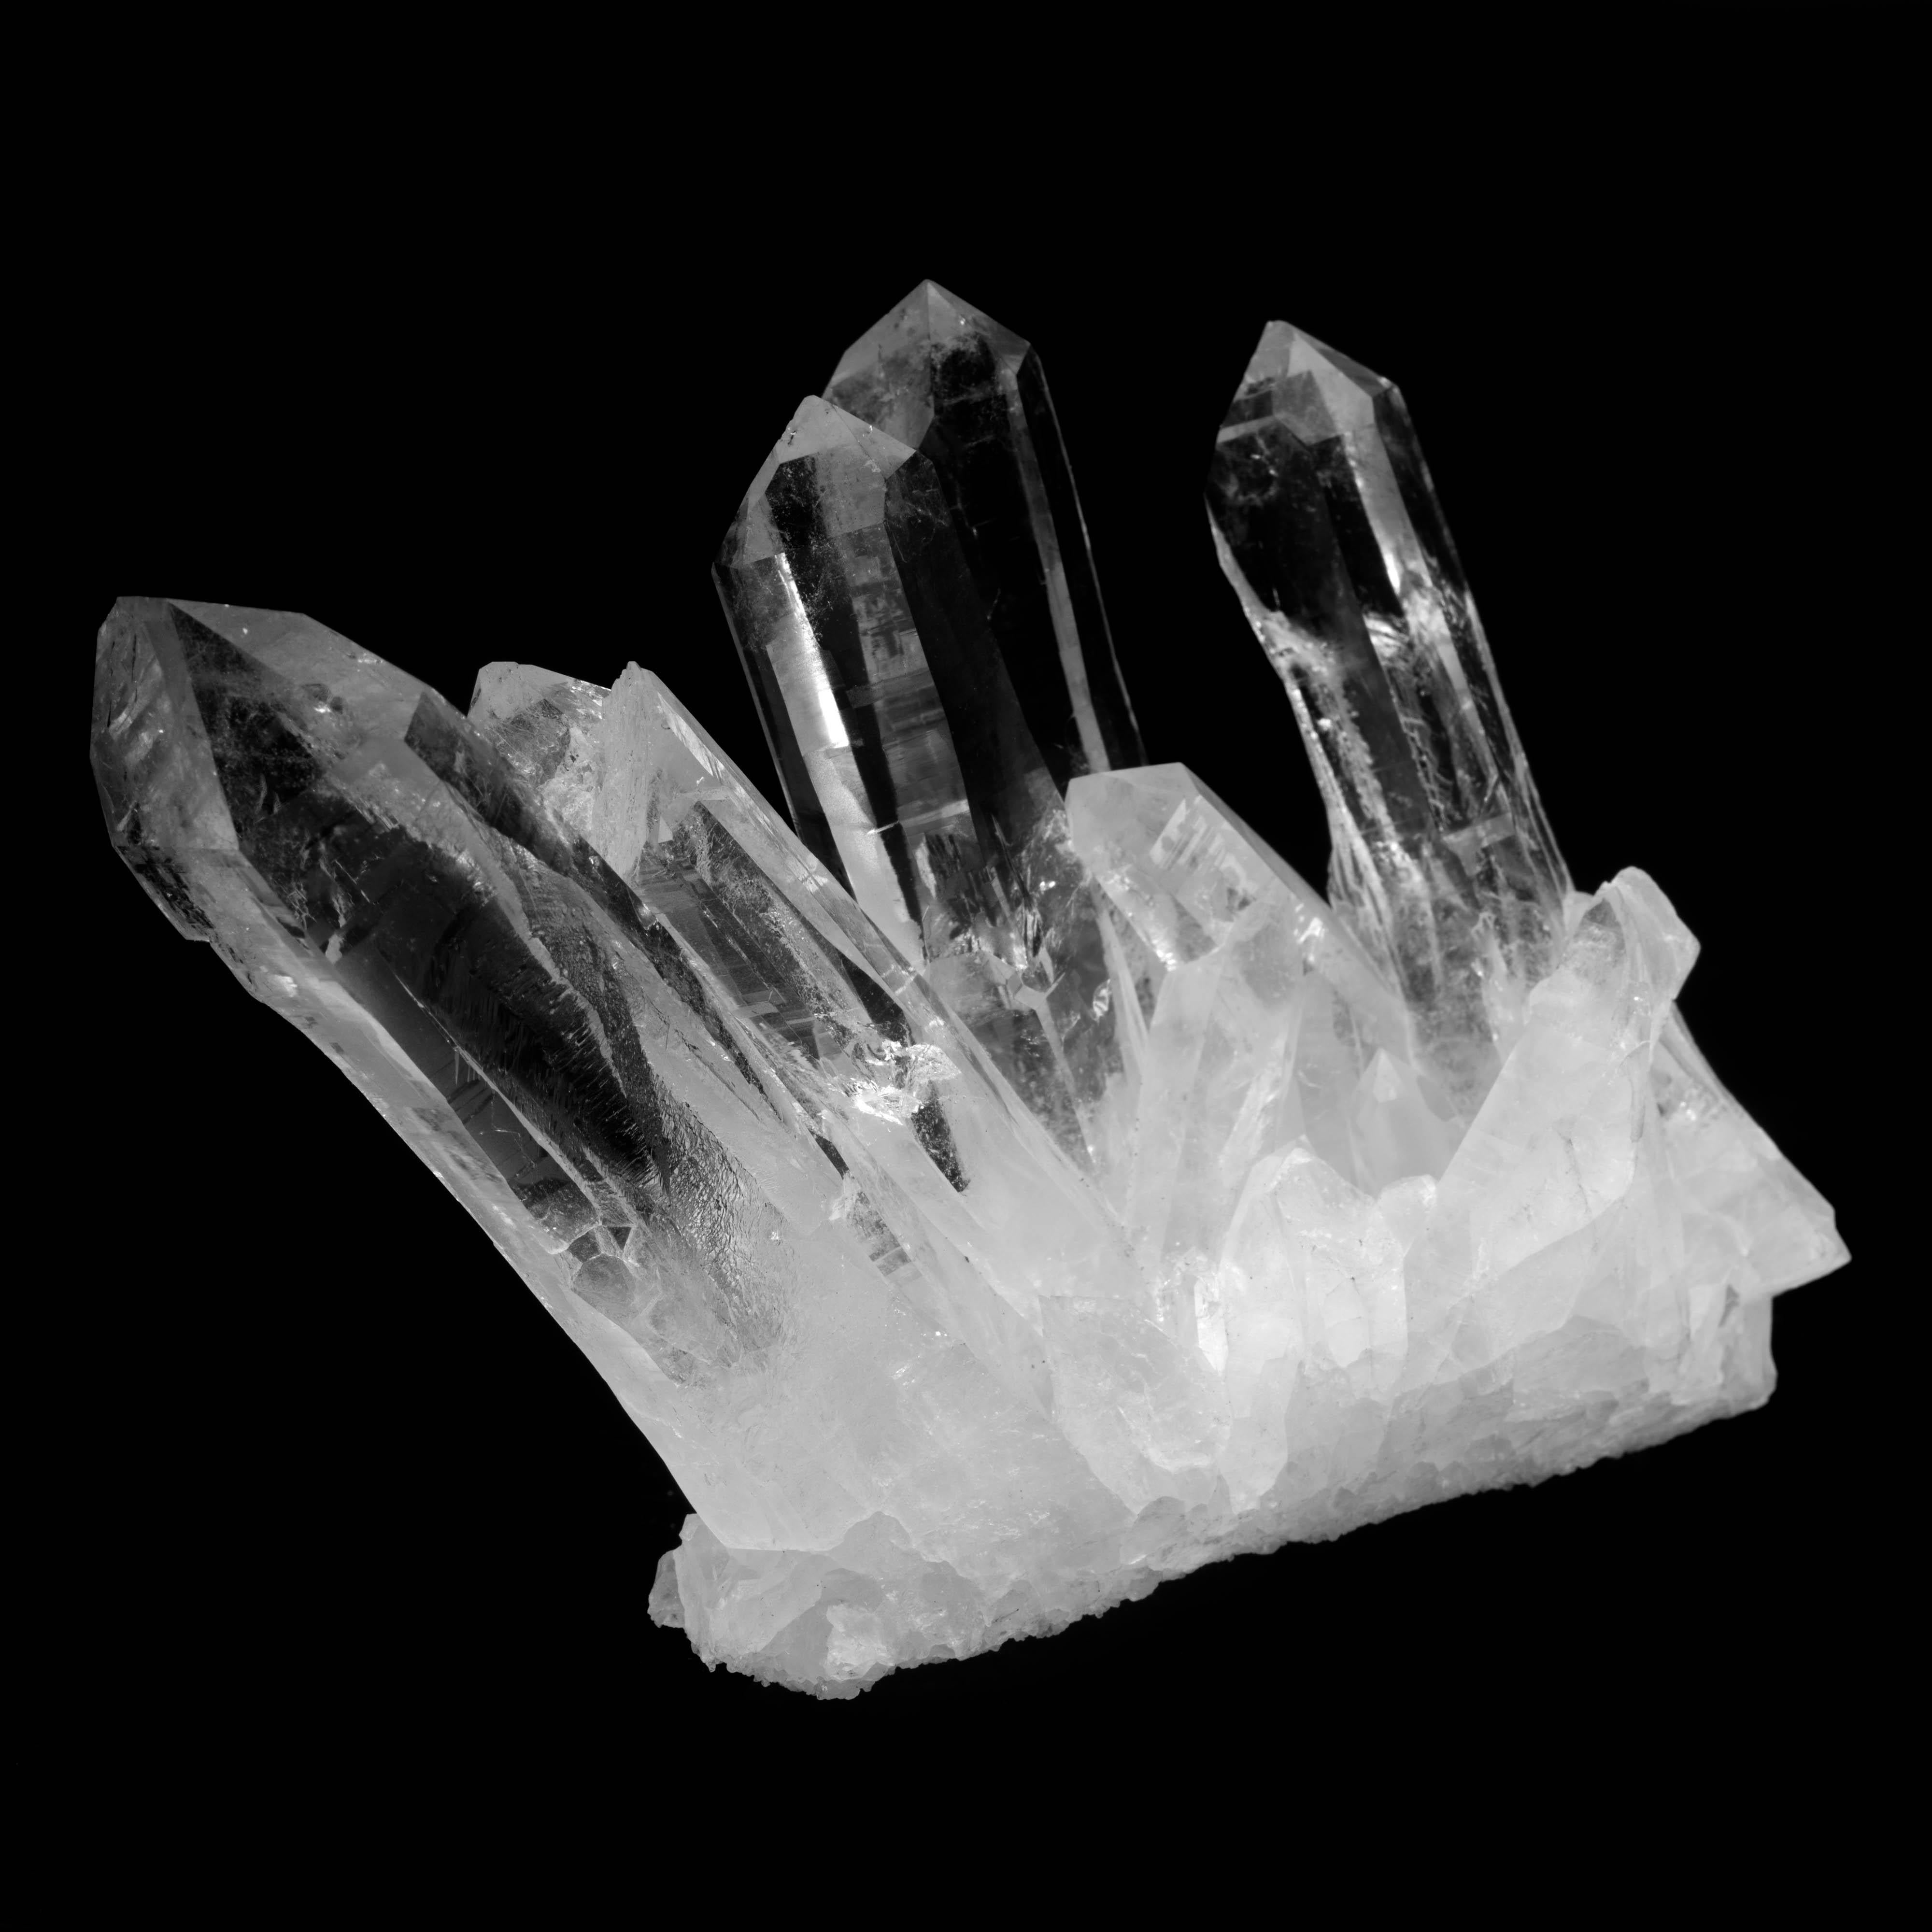 Arkansas quartz is renowned as some of the finest quartz in the world, distinguished by its incredibly translucency and the size of its well-formed crystals. This is an excellent quality Arkansas cluster with amazing clarity and substantially sized,